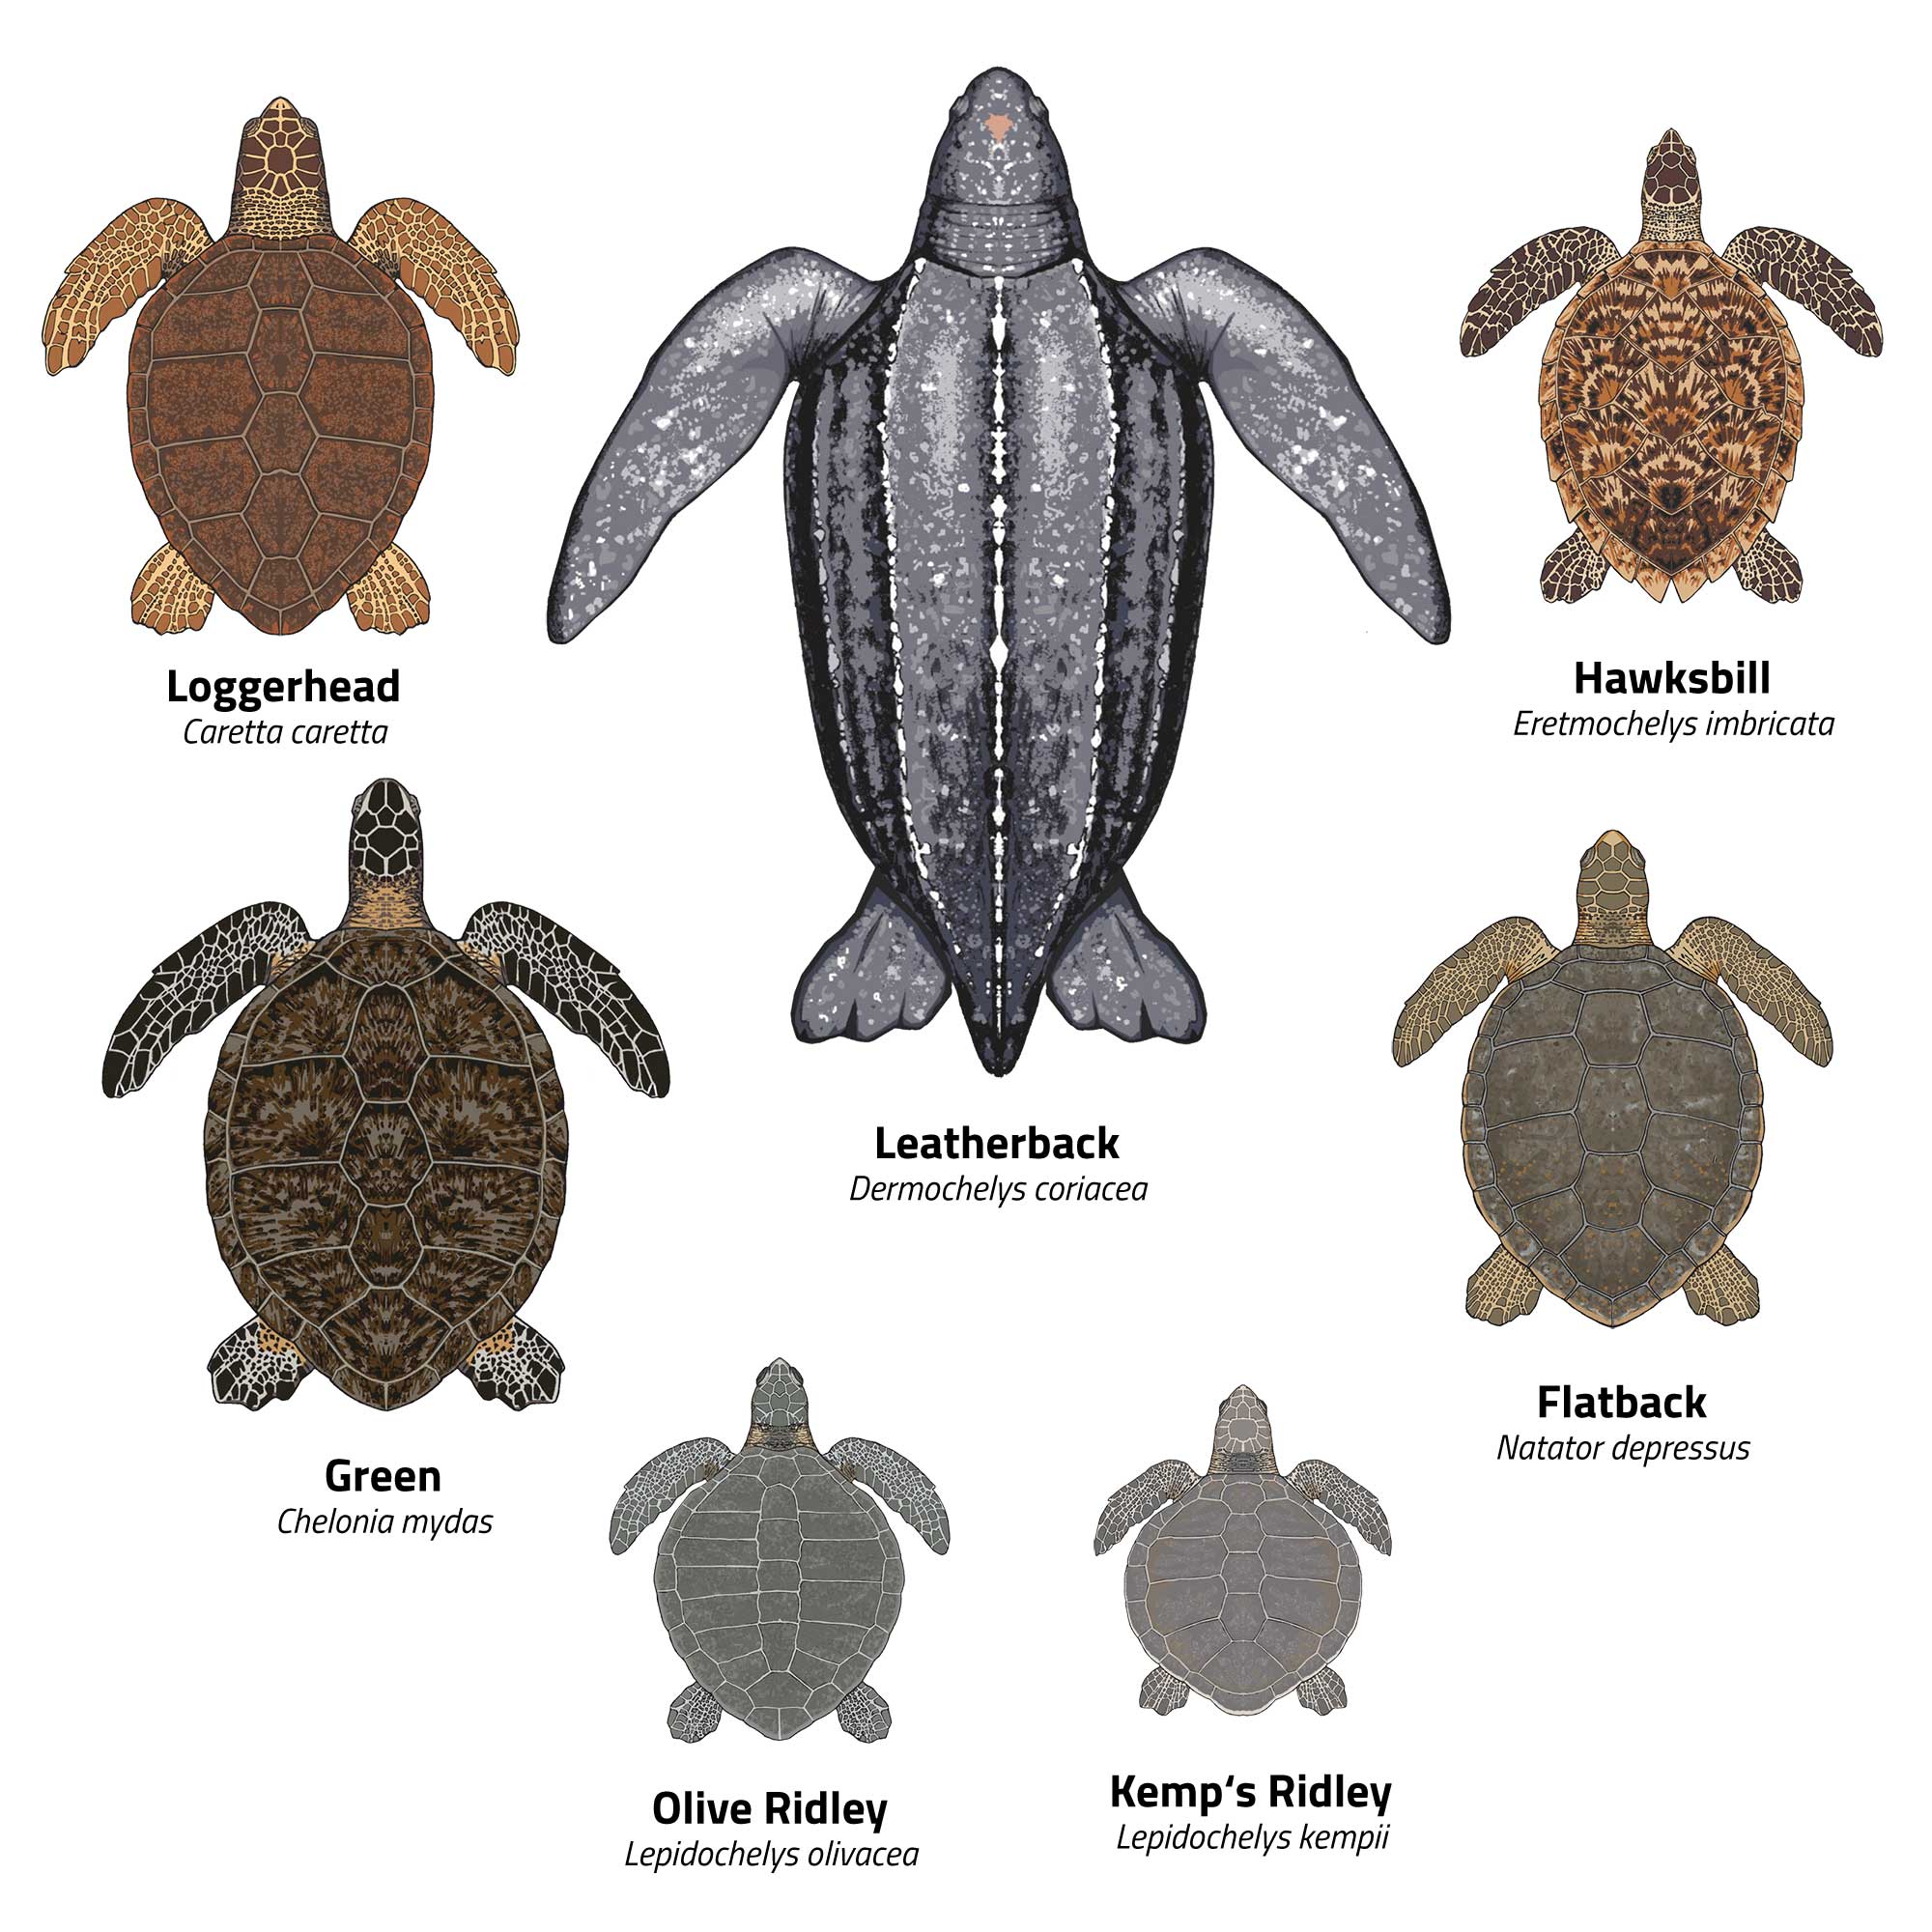 The seven species of sea turtles illustrated